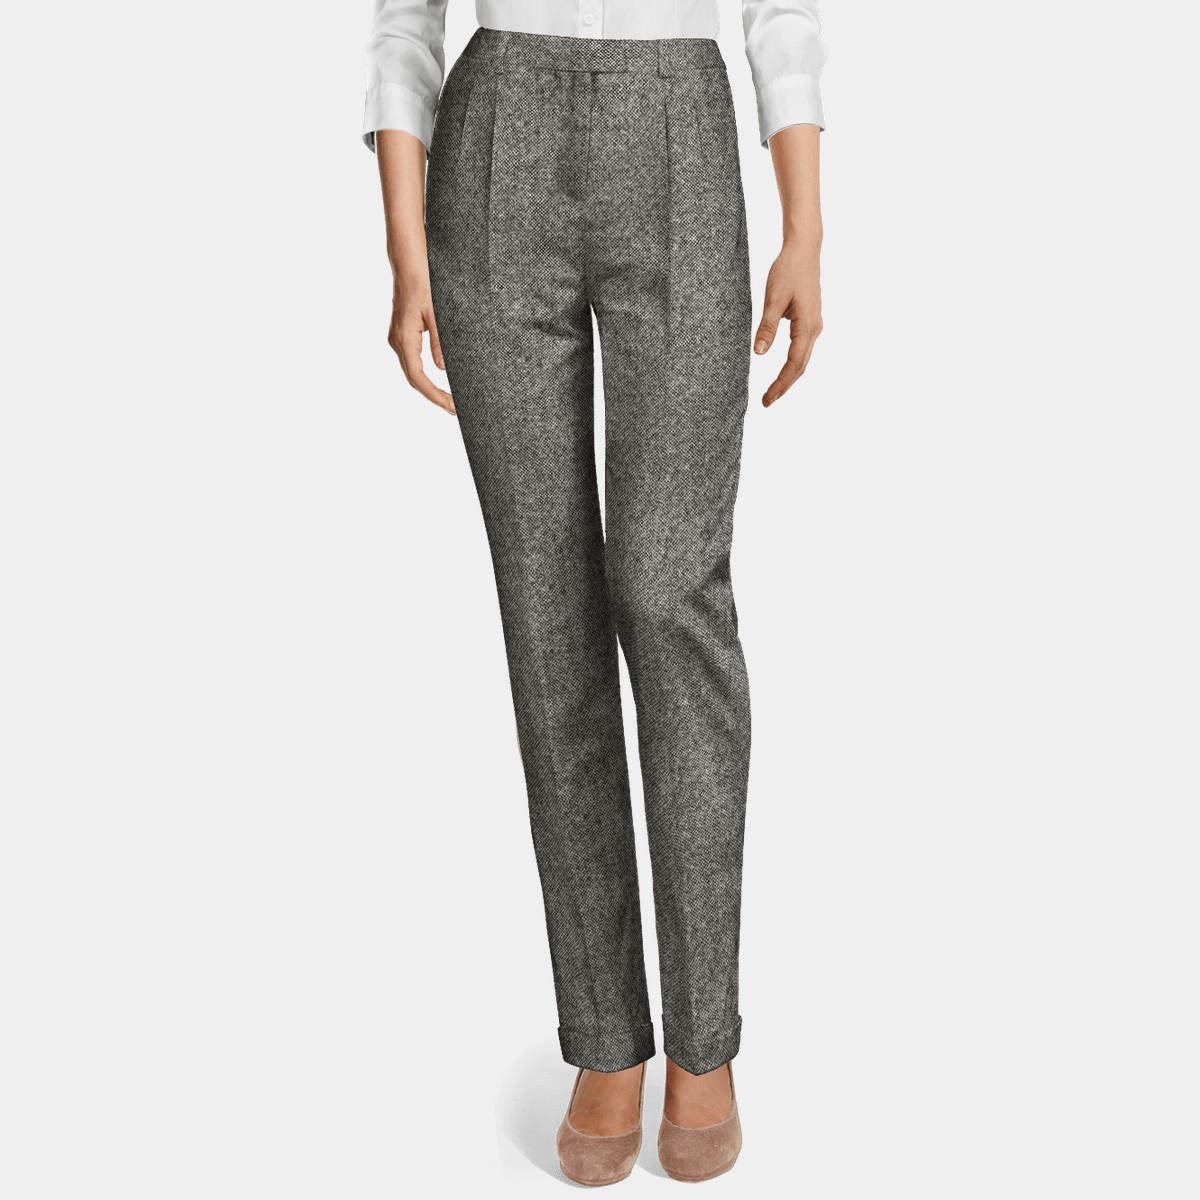 CAMBIO Tweed trousers AVA with sequins in dark gray/ black